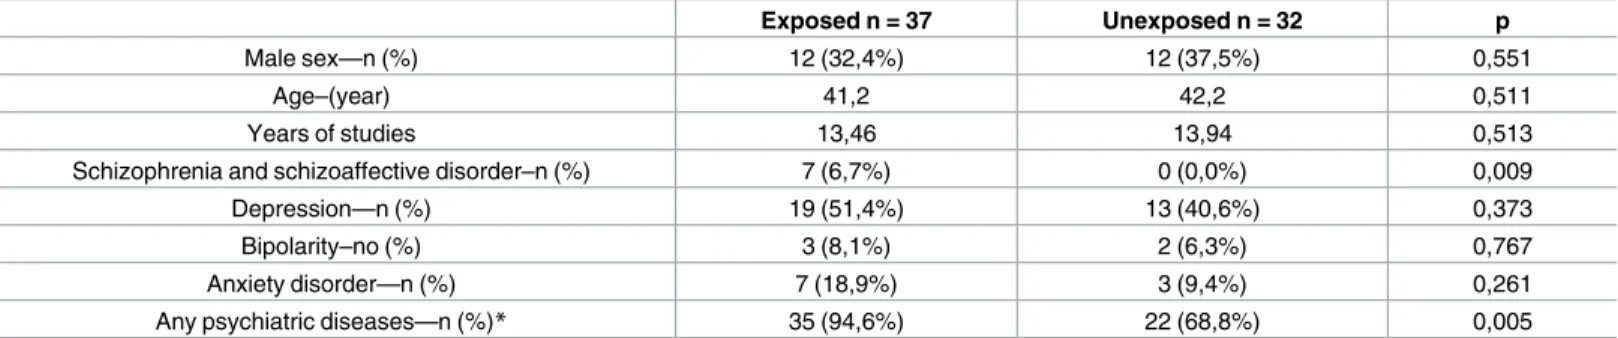 Table 1. Hazard Ratios for Psychiatric Phenotypes in Siblings with and Those without Diethylstilbestrol Exposure.